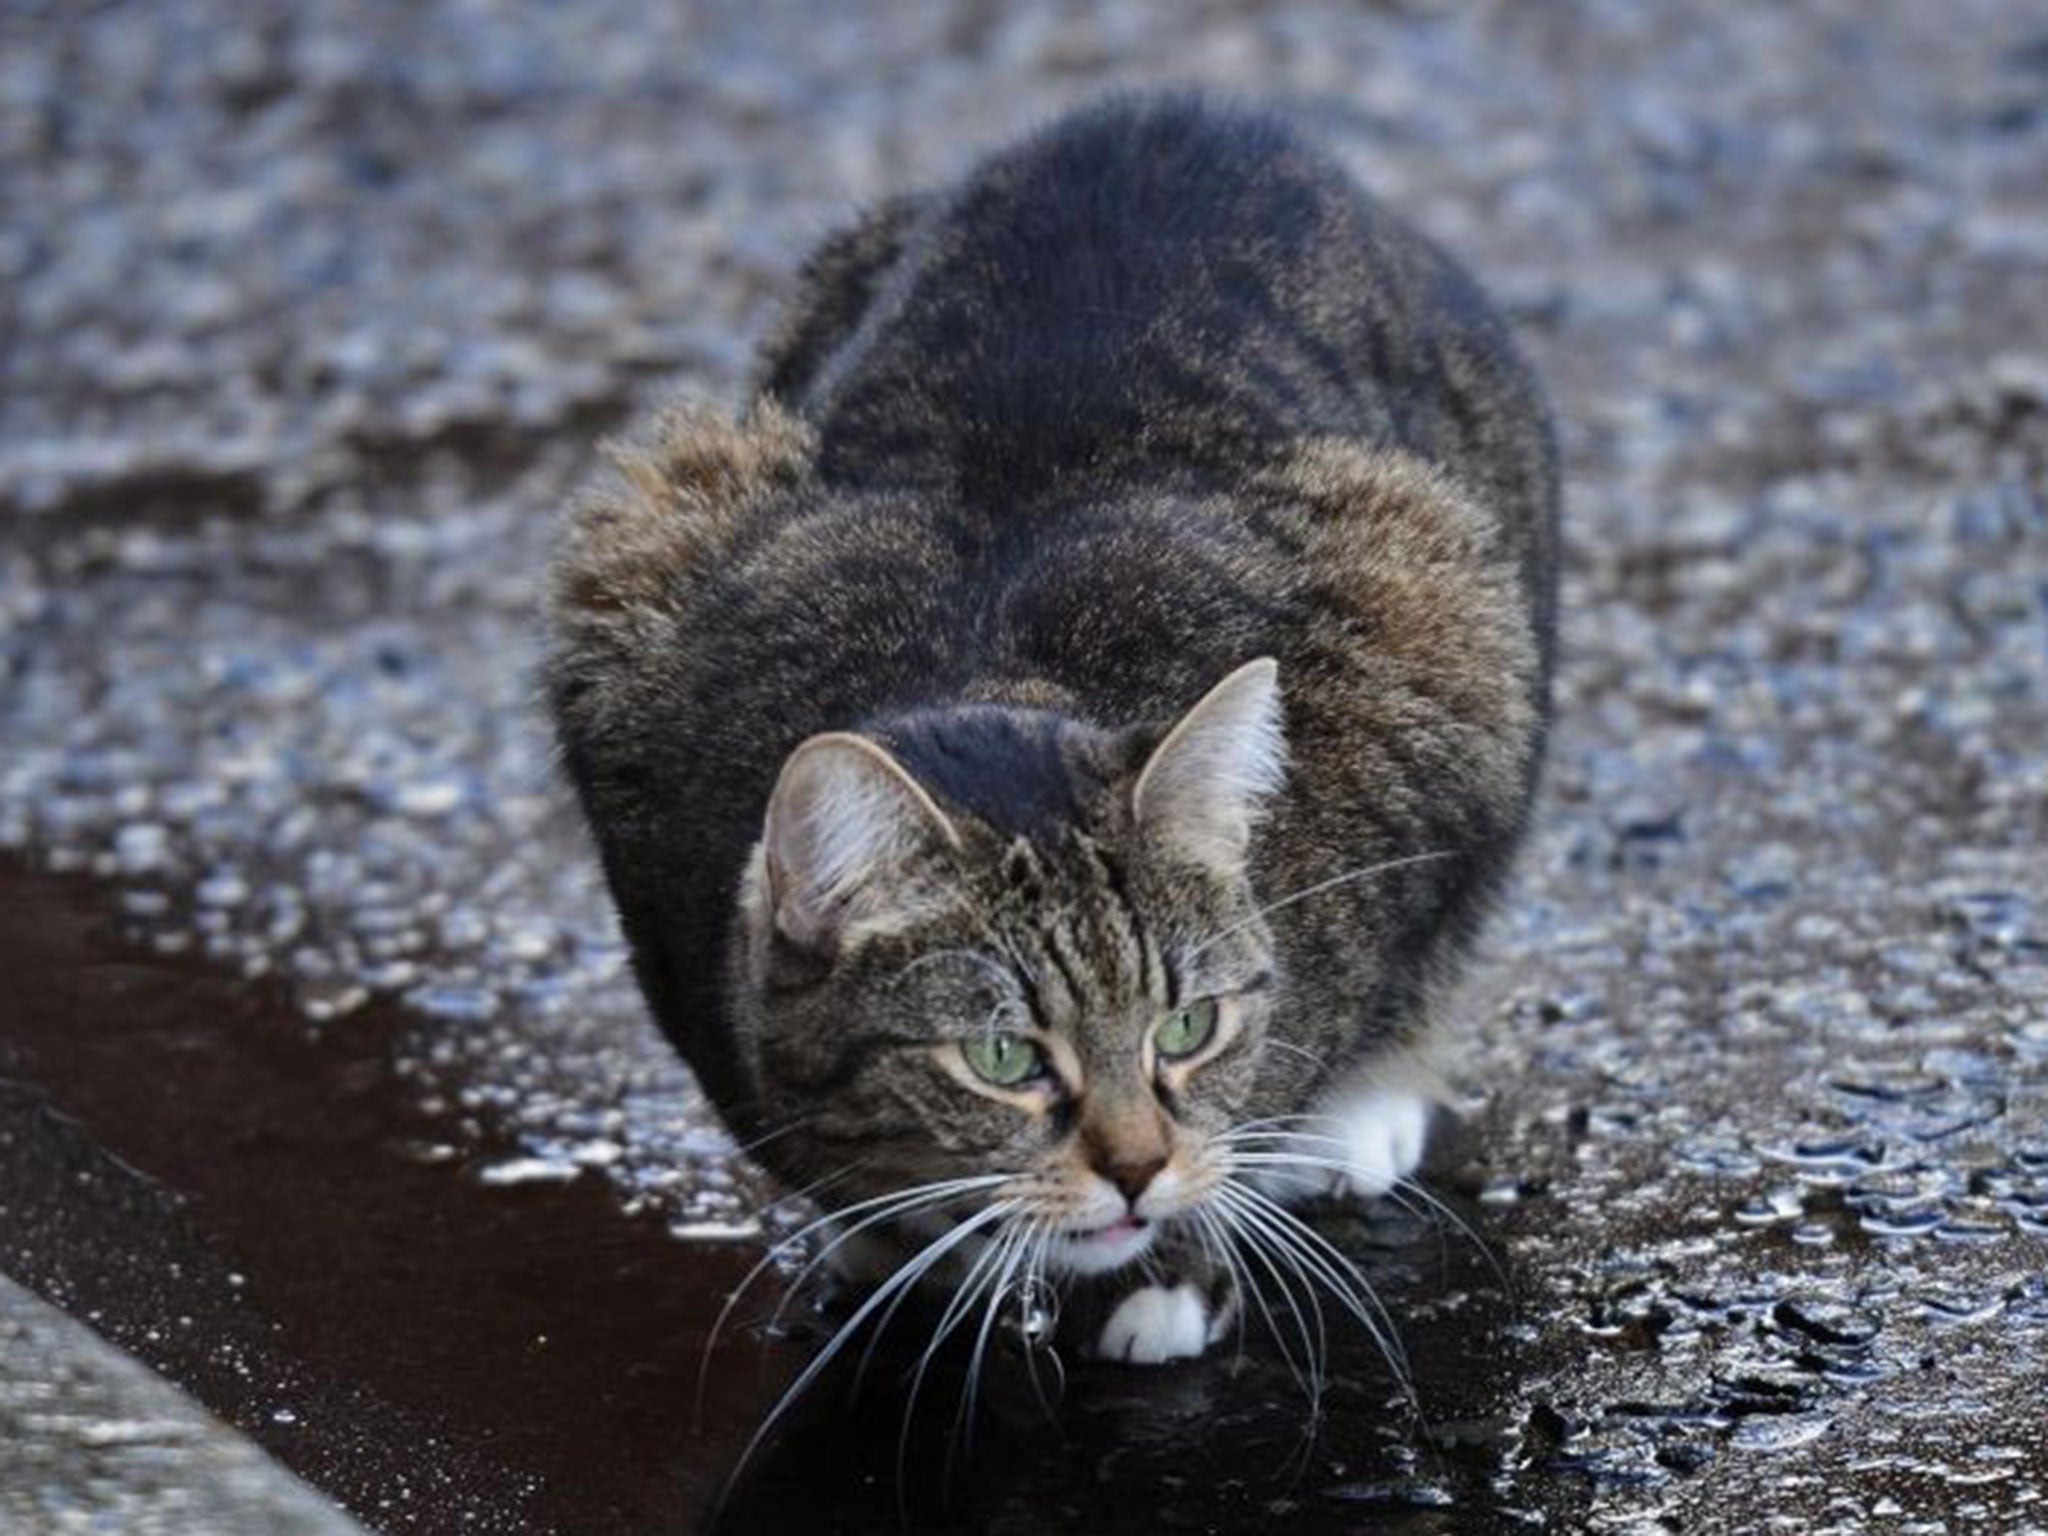 The Osborne’s wandering cat Freya has caused all sorts of consternation in Downing Street